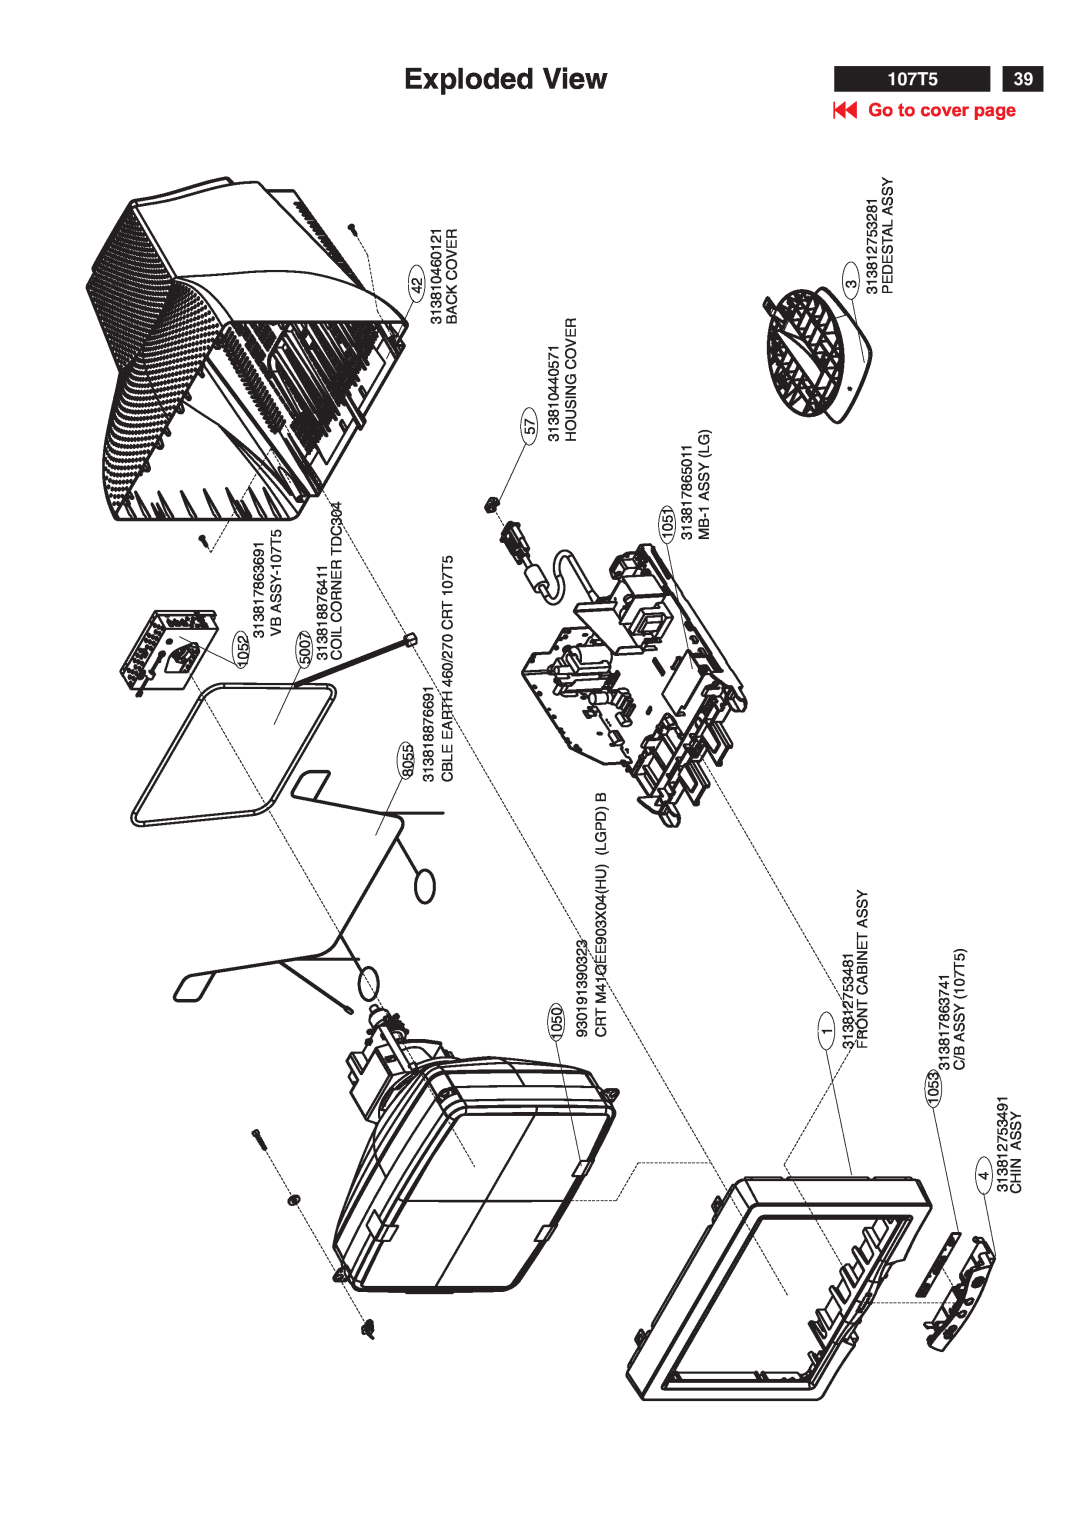 Philips V30 manual Exploded View, 107T5, Go to cover page 